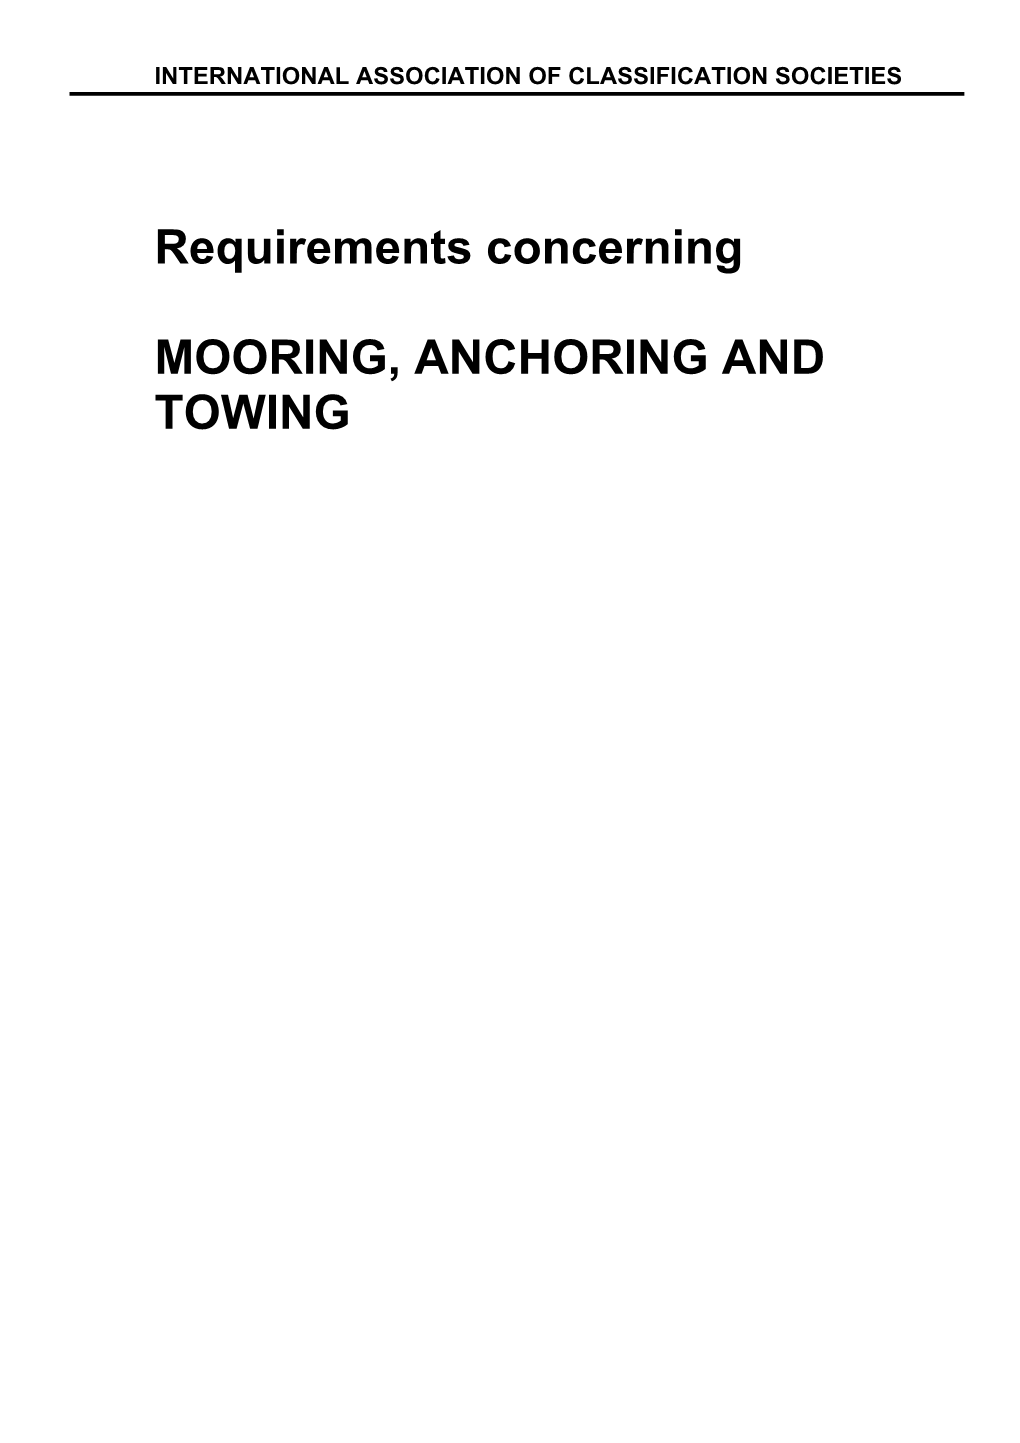 Requirements Concerning MOORING, ANCHORING and TOWING